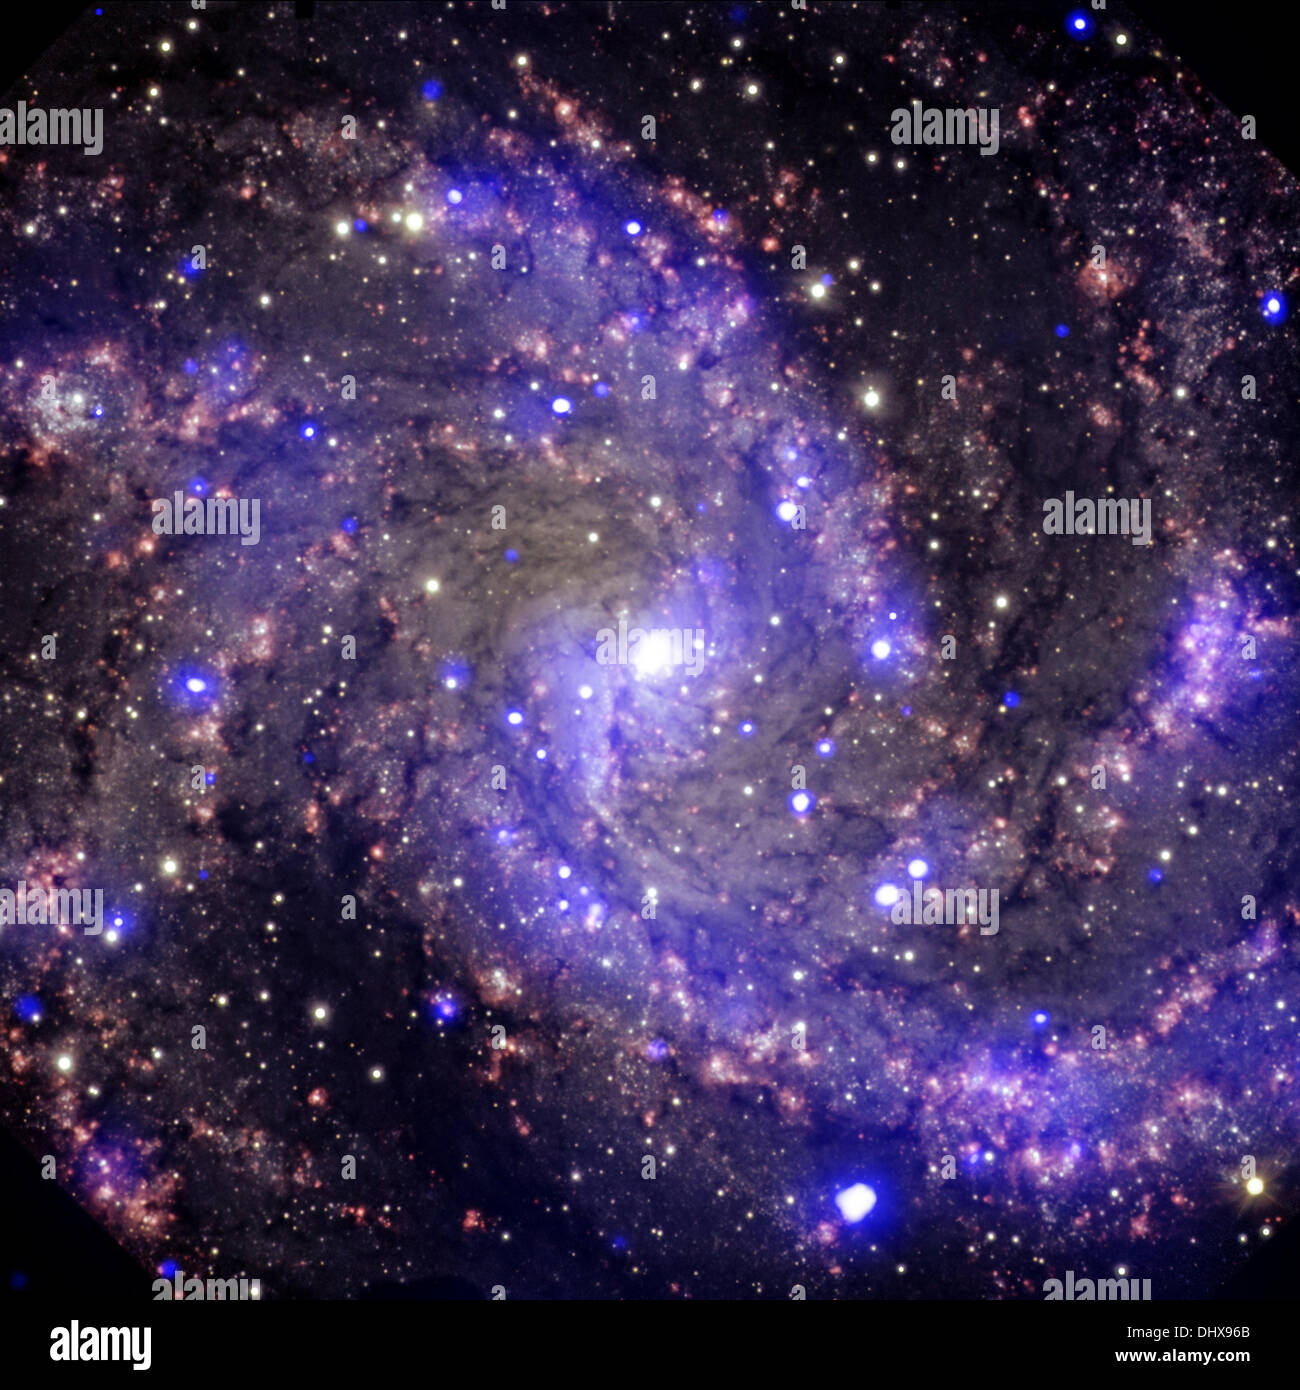 Chandra space telescope view of NGC 6946 a medium-sized, face-on spiral galaxy about 22 million light years away from Earth. In the past century, eight supernovas have been observed to explode in the arms of this galaxy. Chandra observations have found three of the oldest supernovas ever detected in X-rays, giving the galaxy the nickname of the 'Fireworks Galaxy.' Credit:  Planetpix/Alamy Live News Stock Photo